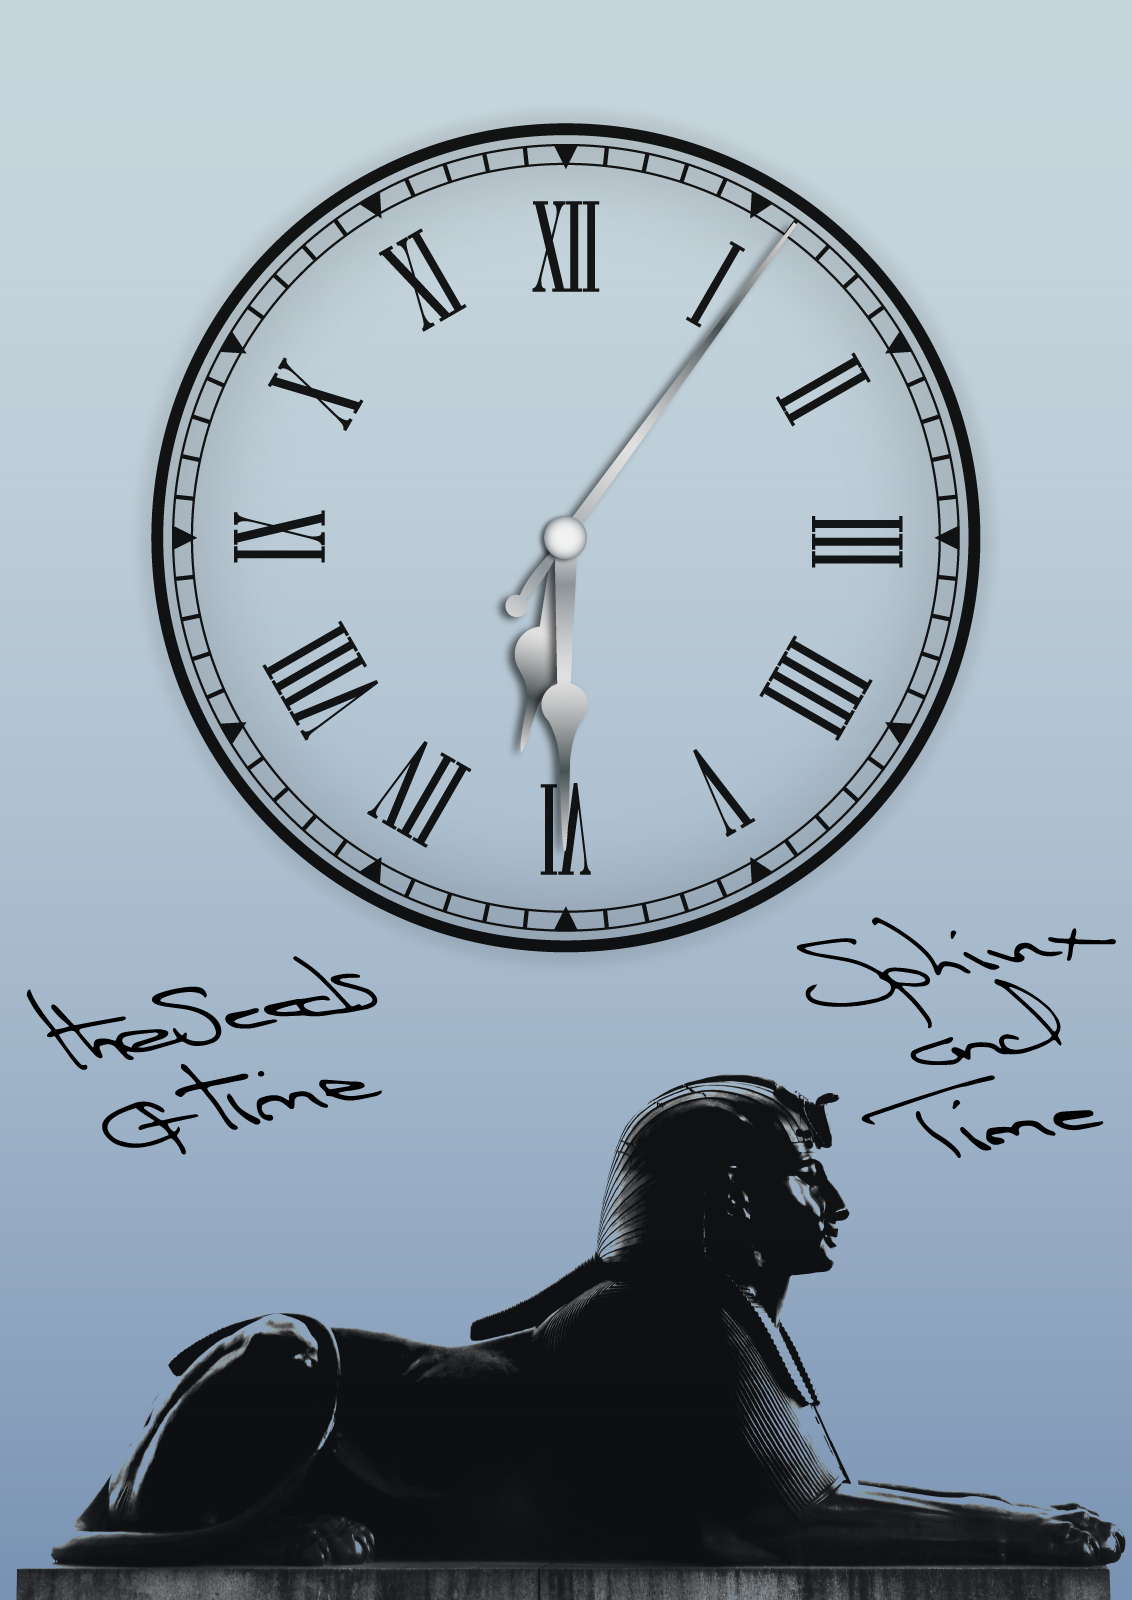 Poster art for EP album titled Sphinx and Time by The Seeds of Time on which there is a digital design of a clock showing 6:30:06 on a sky blue background with a dark bronze sphinx in the lower part of the poster